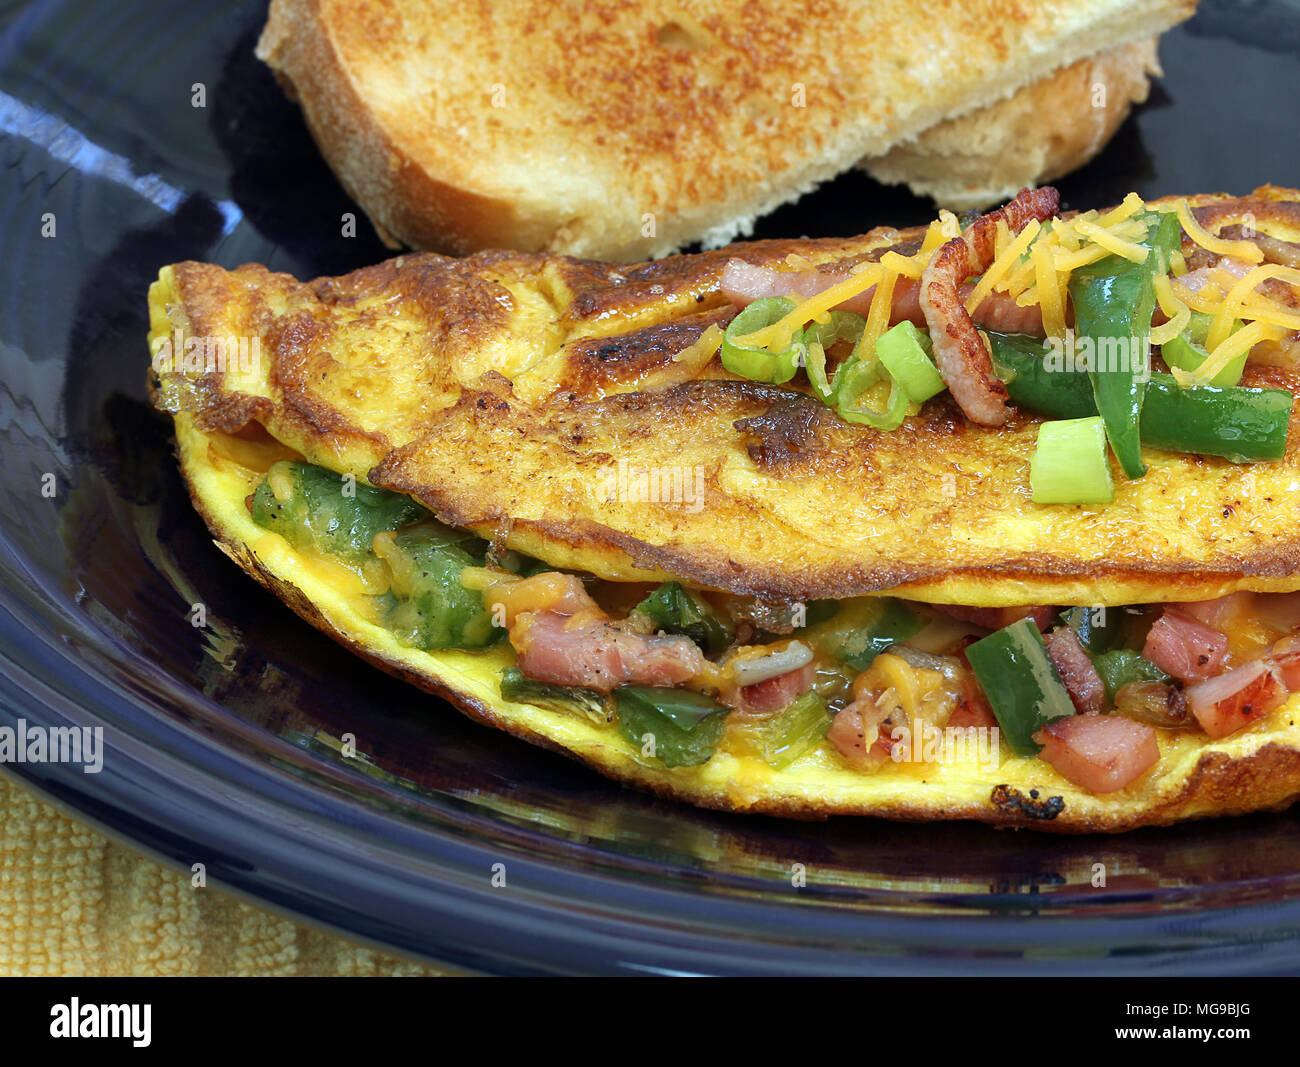 An extreme macro of a Western or Denver omelet.  Omelet includes ham, cheese, peppers, and onions. Stock Photo